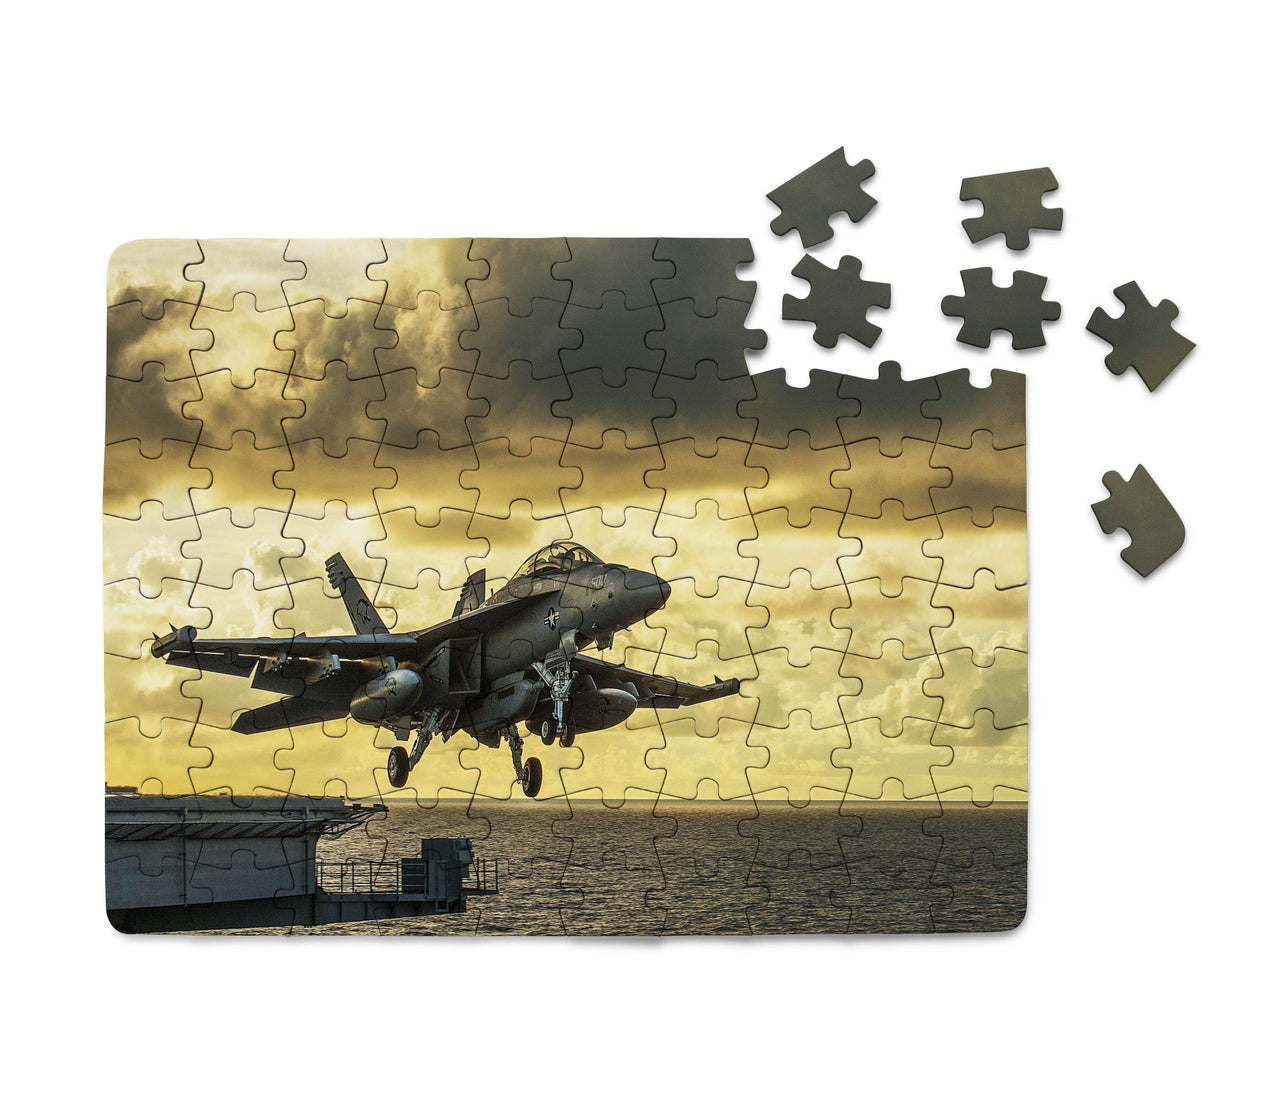 Departing Jet Aircraft Printed Puzzles Aviation Shop 